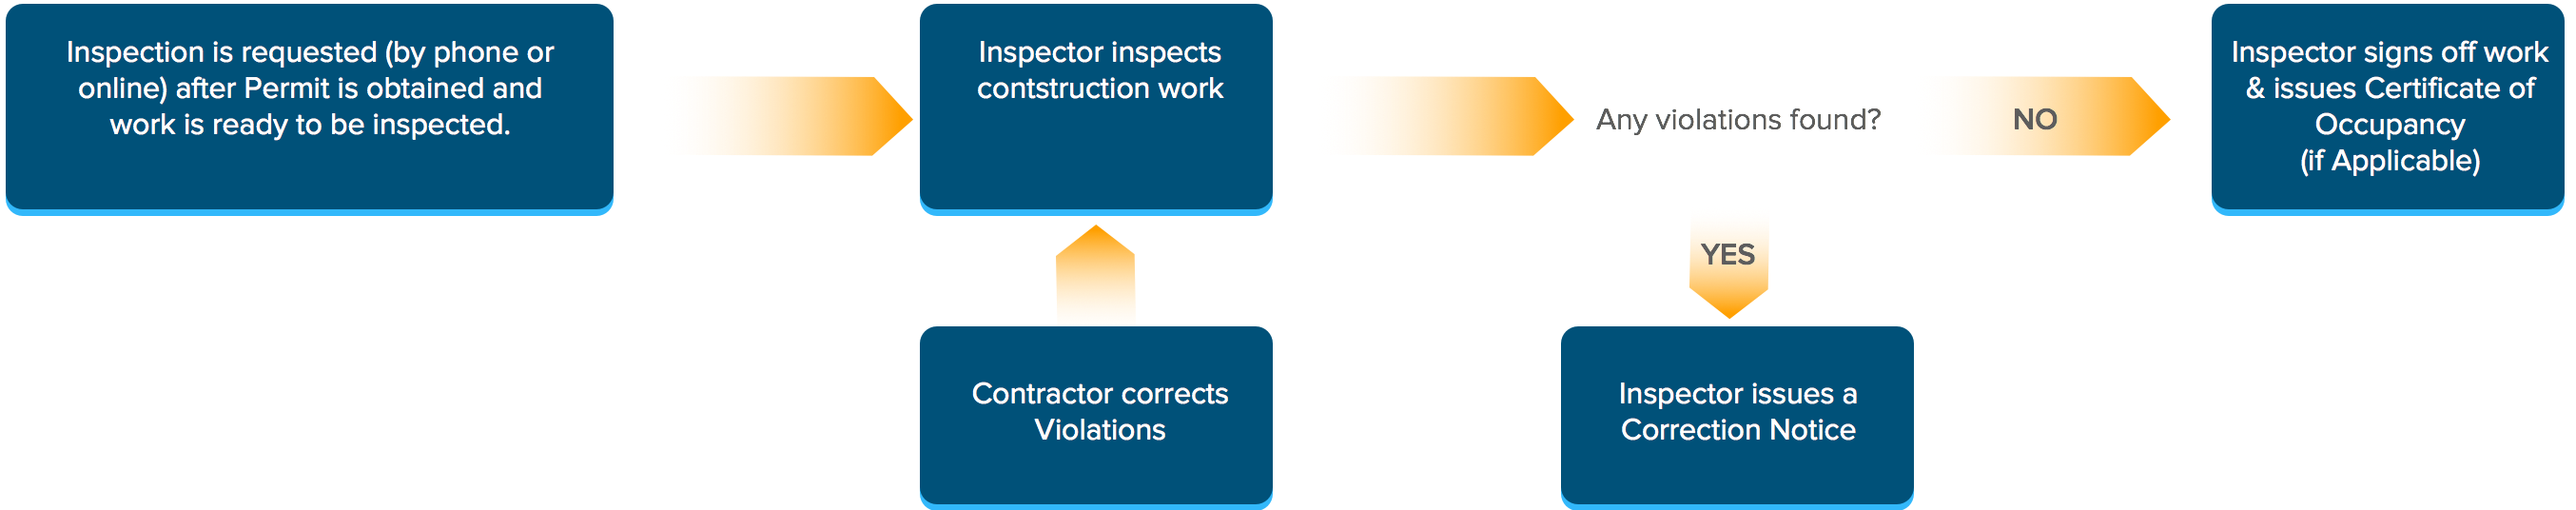 Flowchart for the inspection process